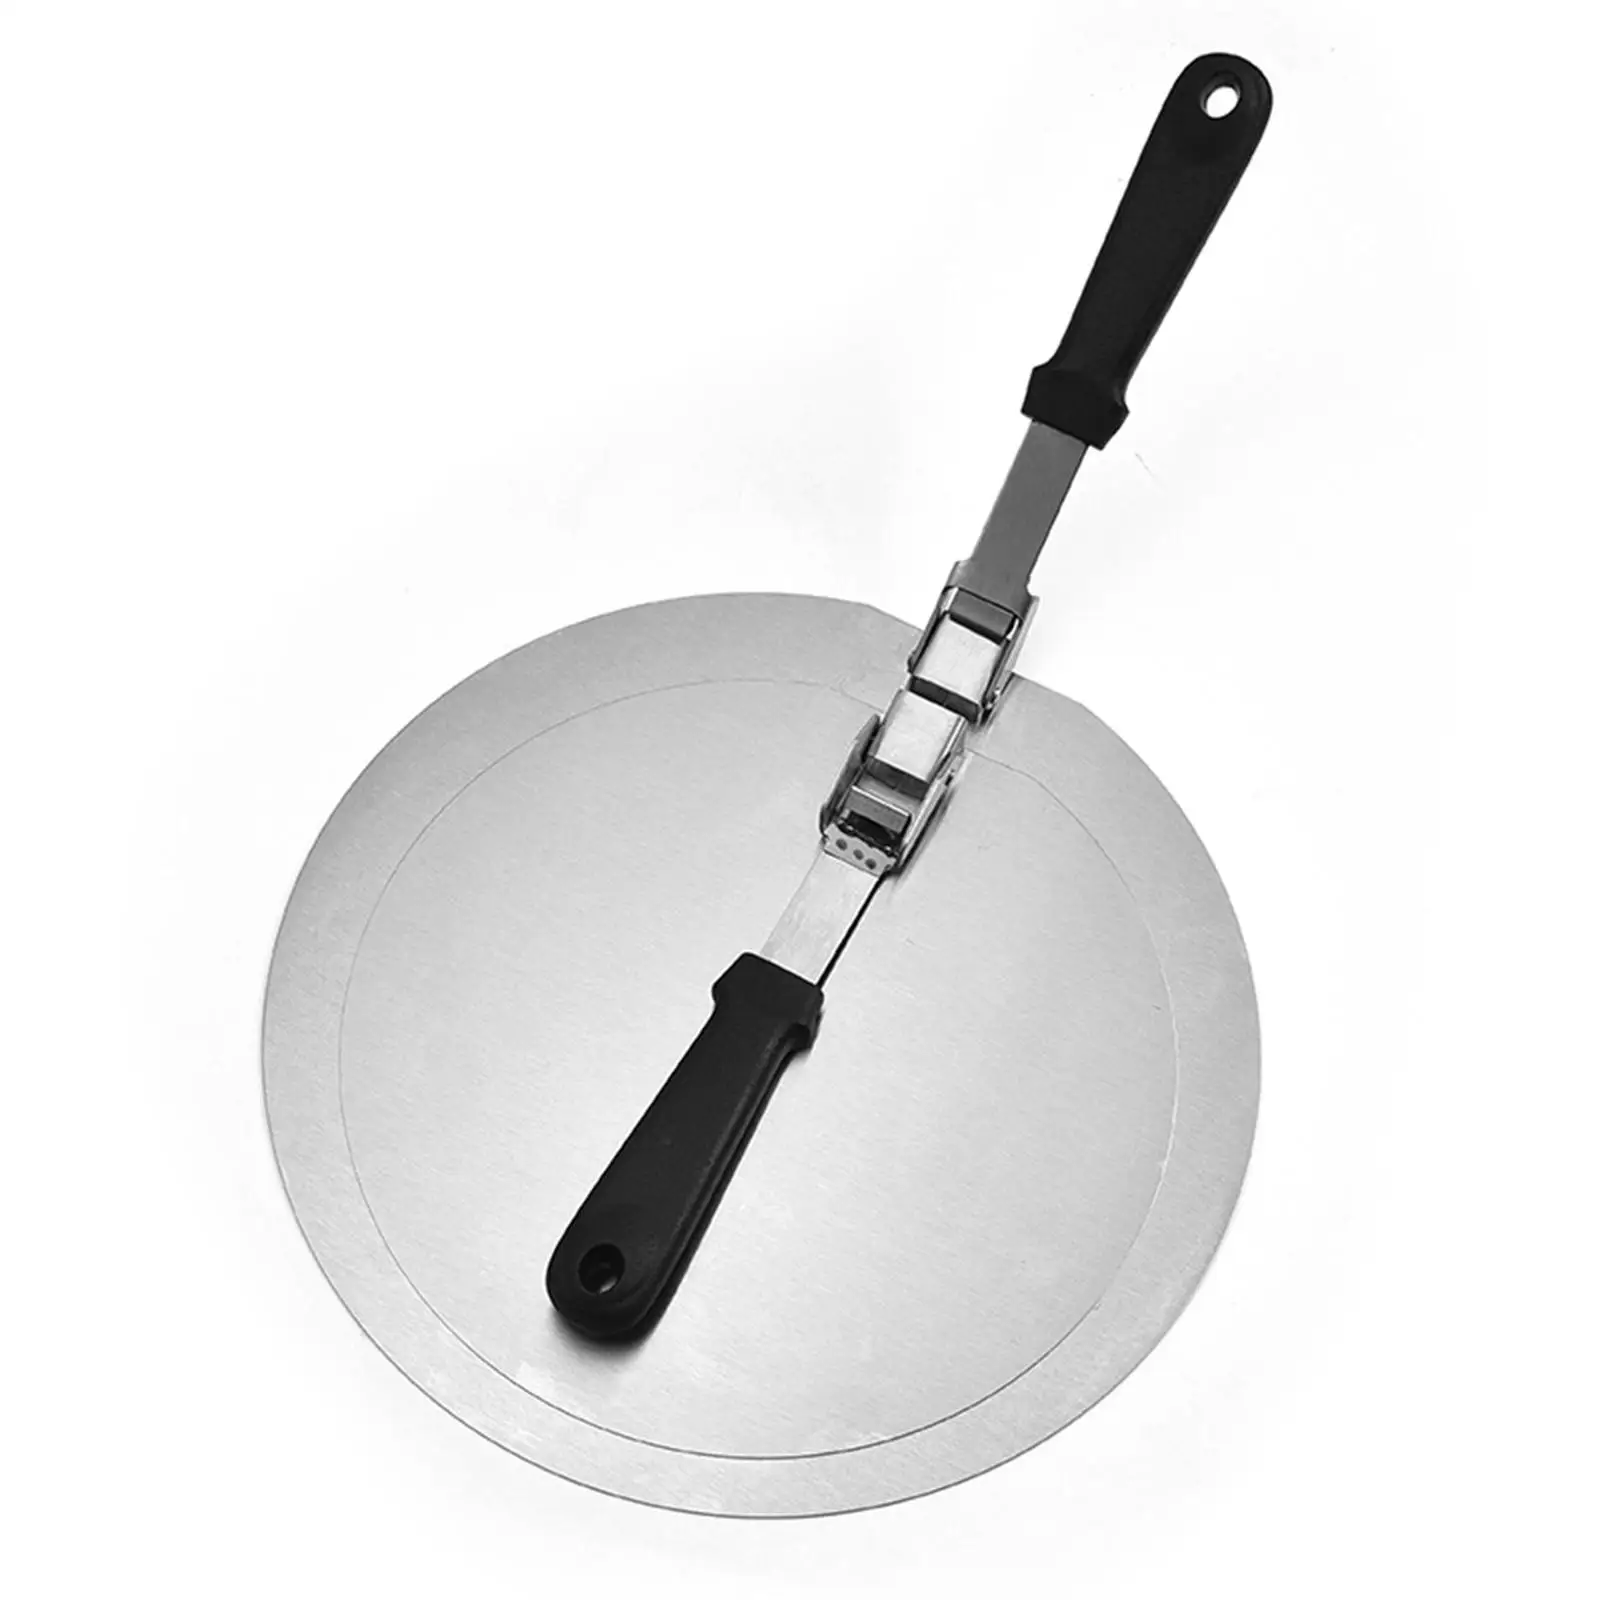 Stainless Steel Pizza Peel Paddle Nonstick Bakeware Tool with Long Handle